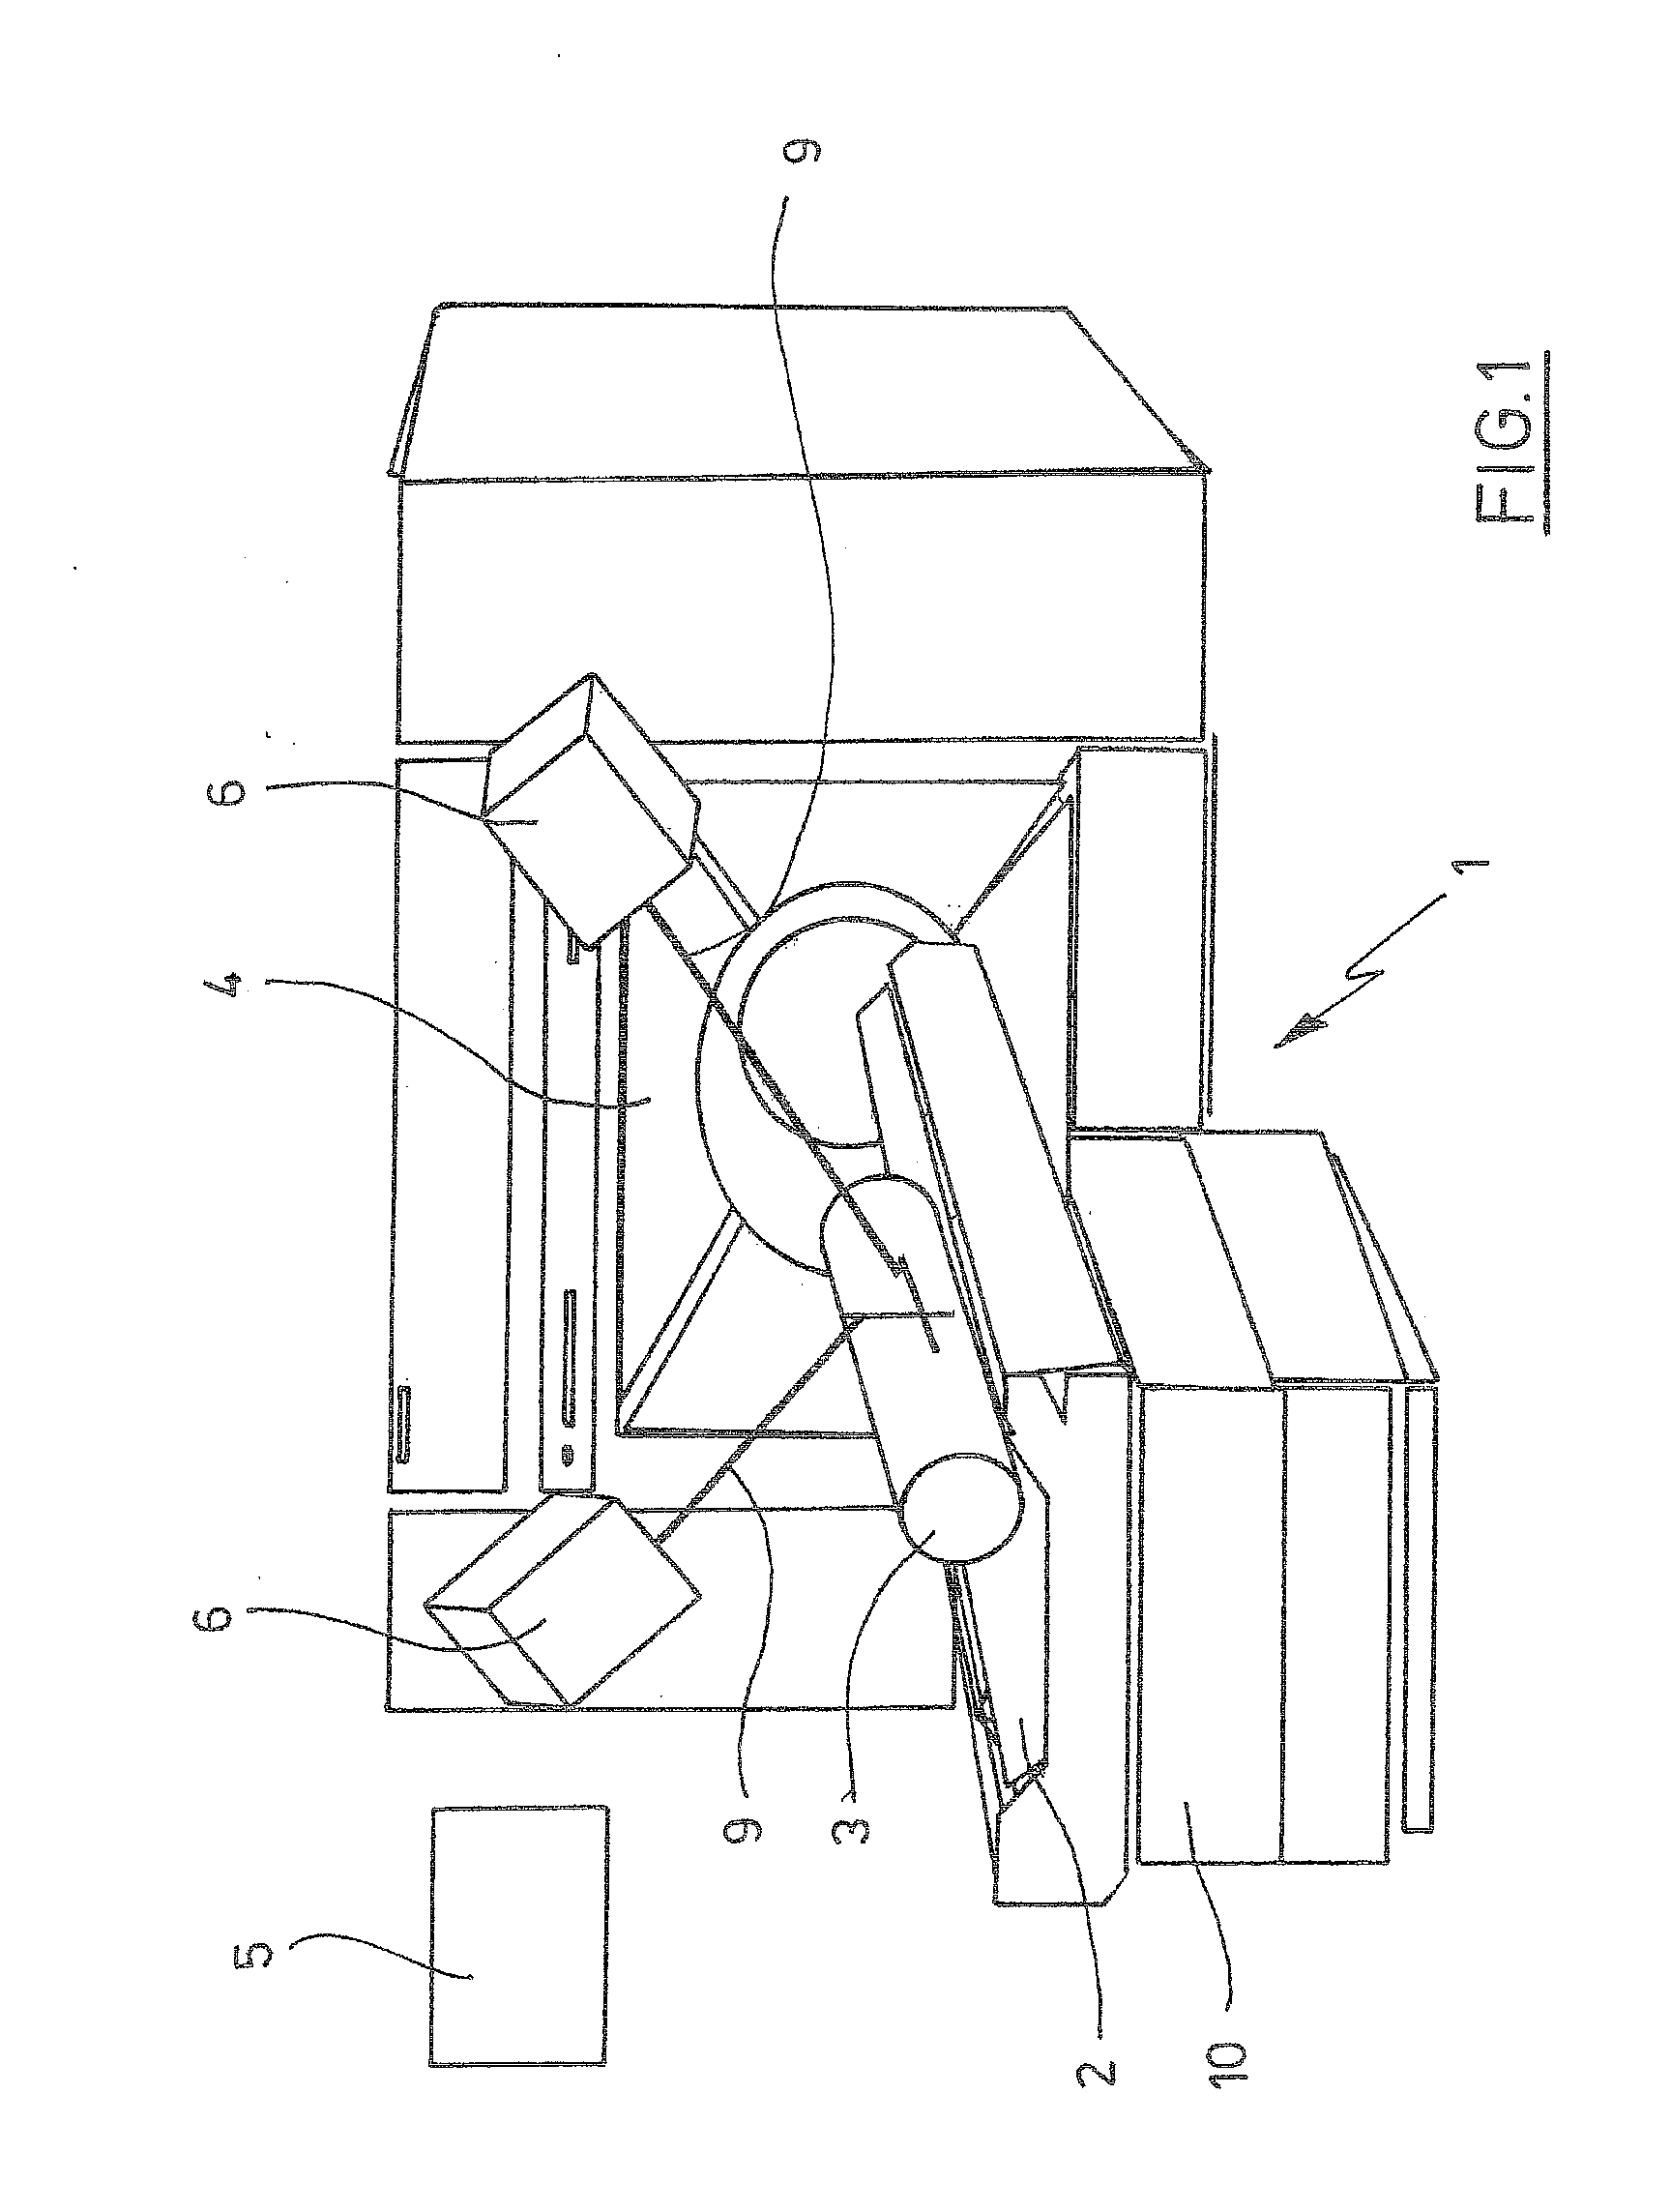 Apparatus and method for the representation of an area on the surface of a patient's body